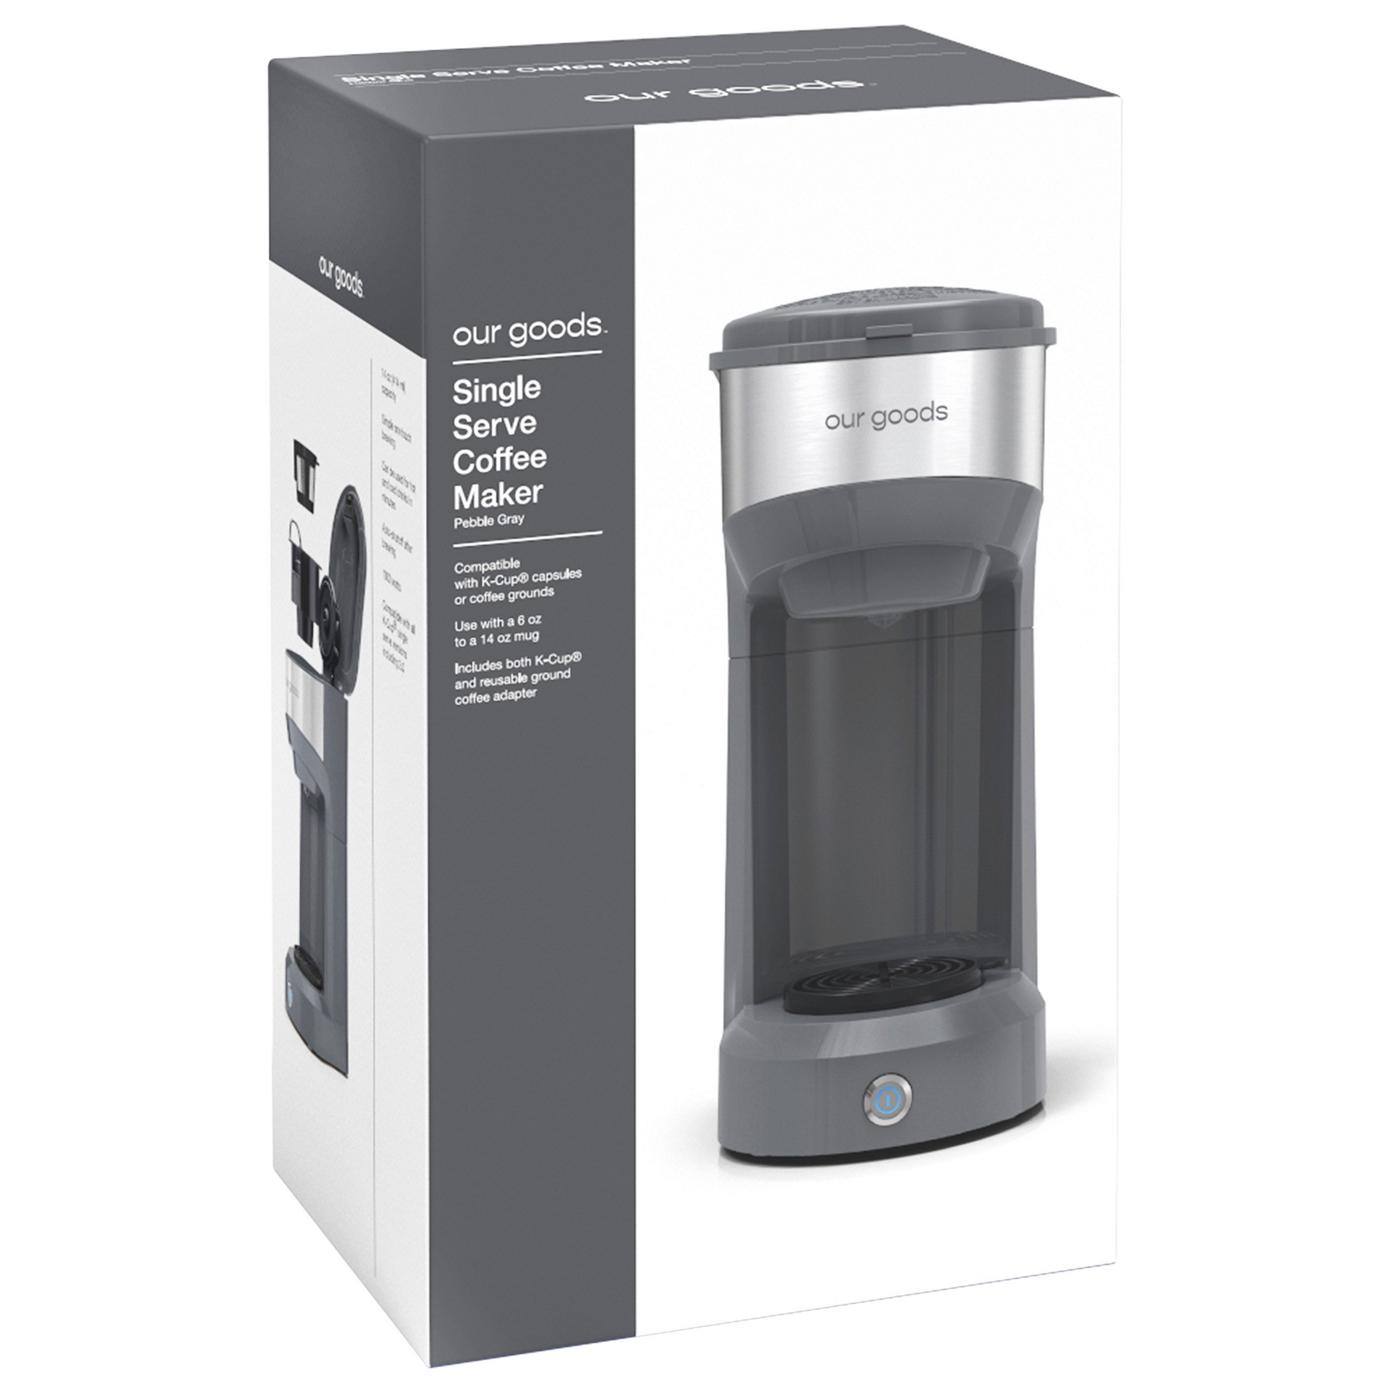 our goods Single Serve Coffee Maker - Pebble Gray; image 2 of 3